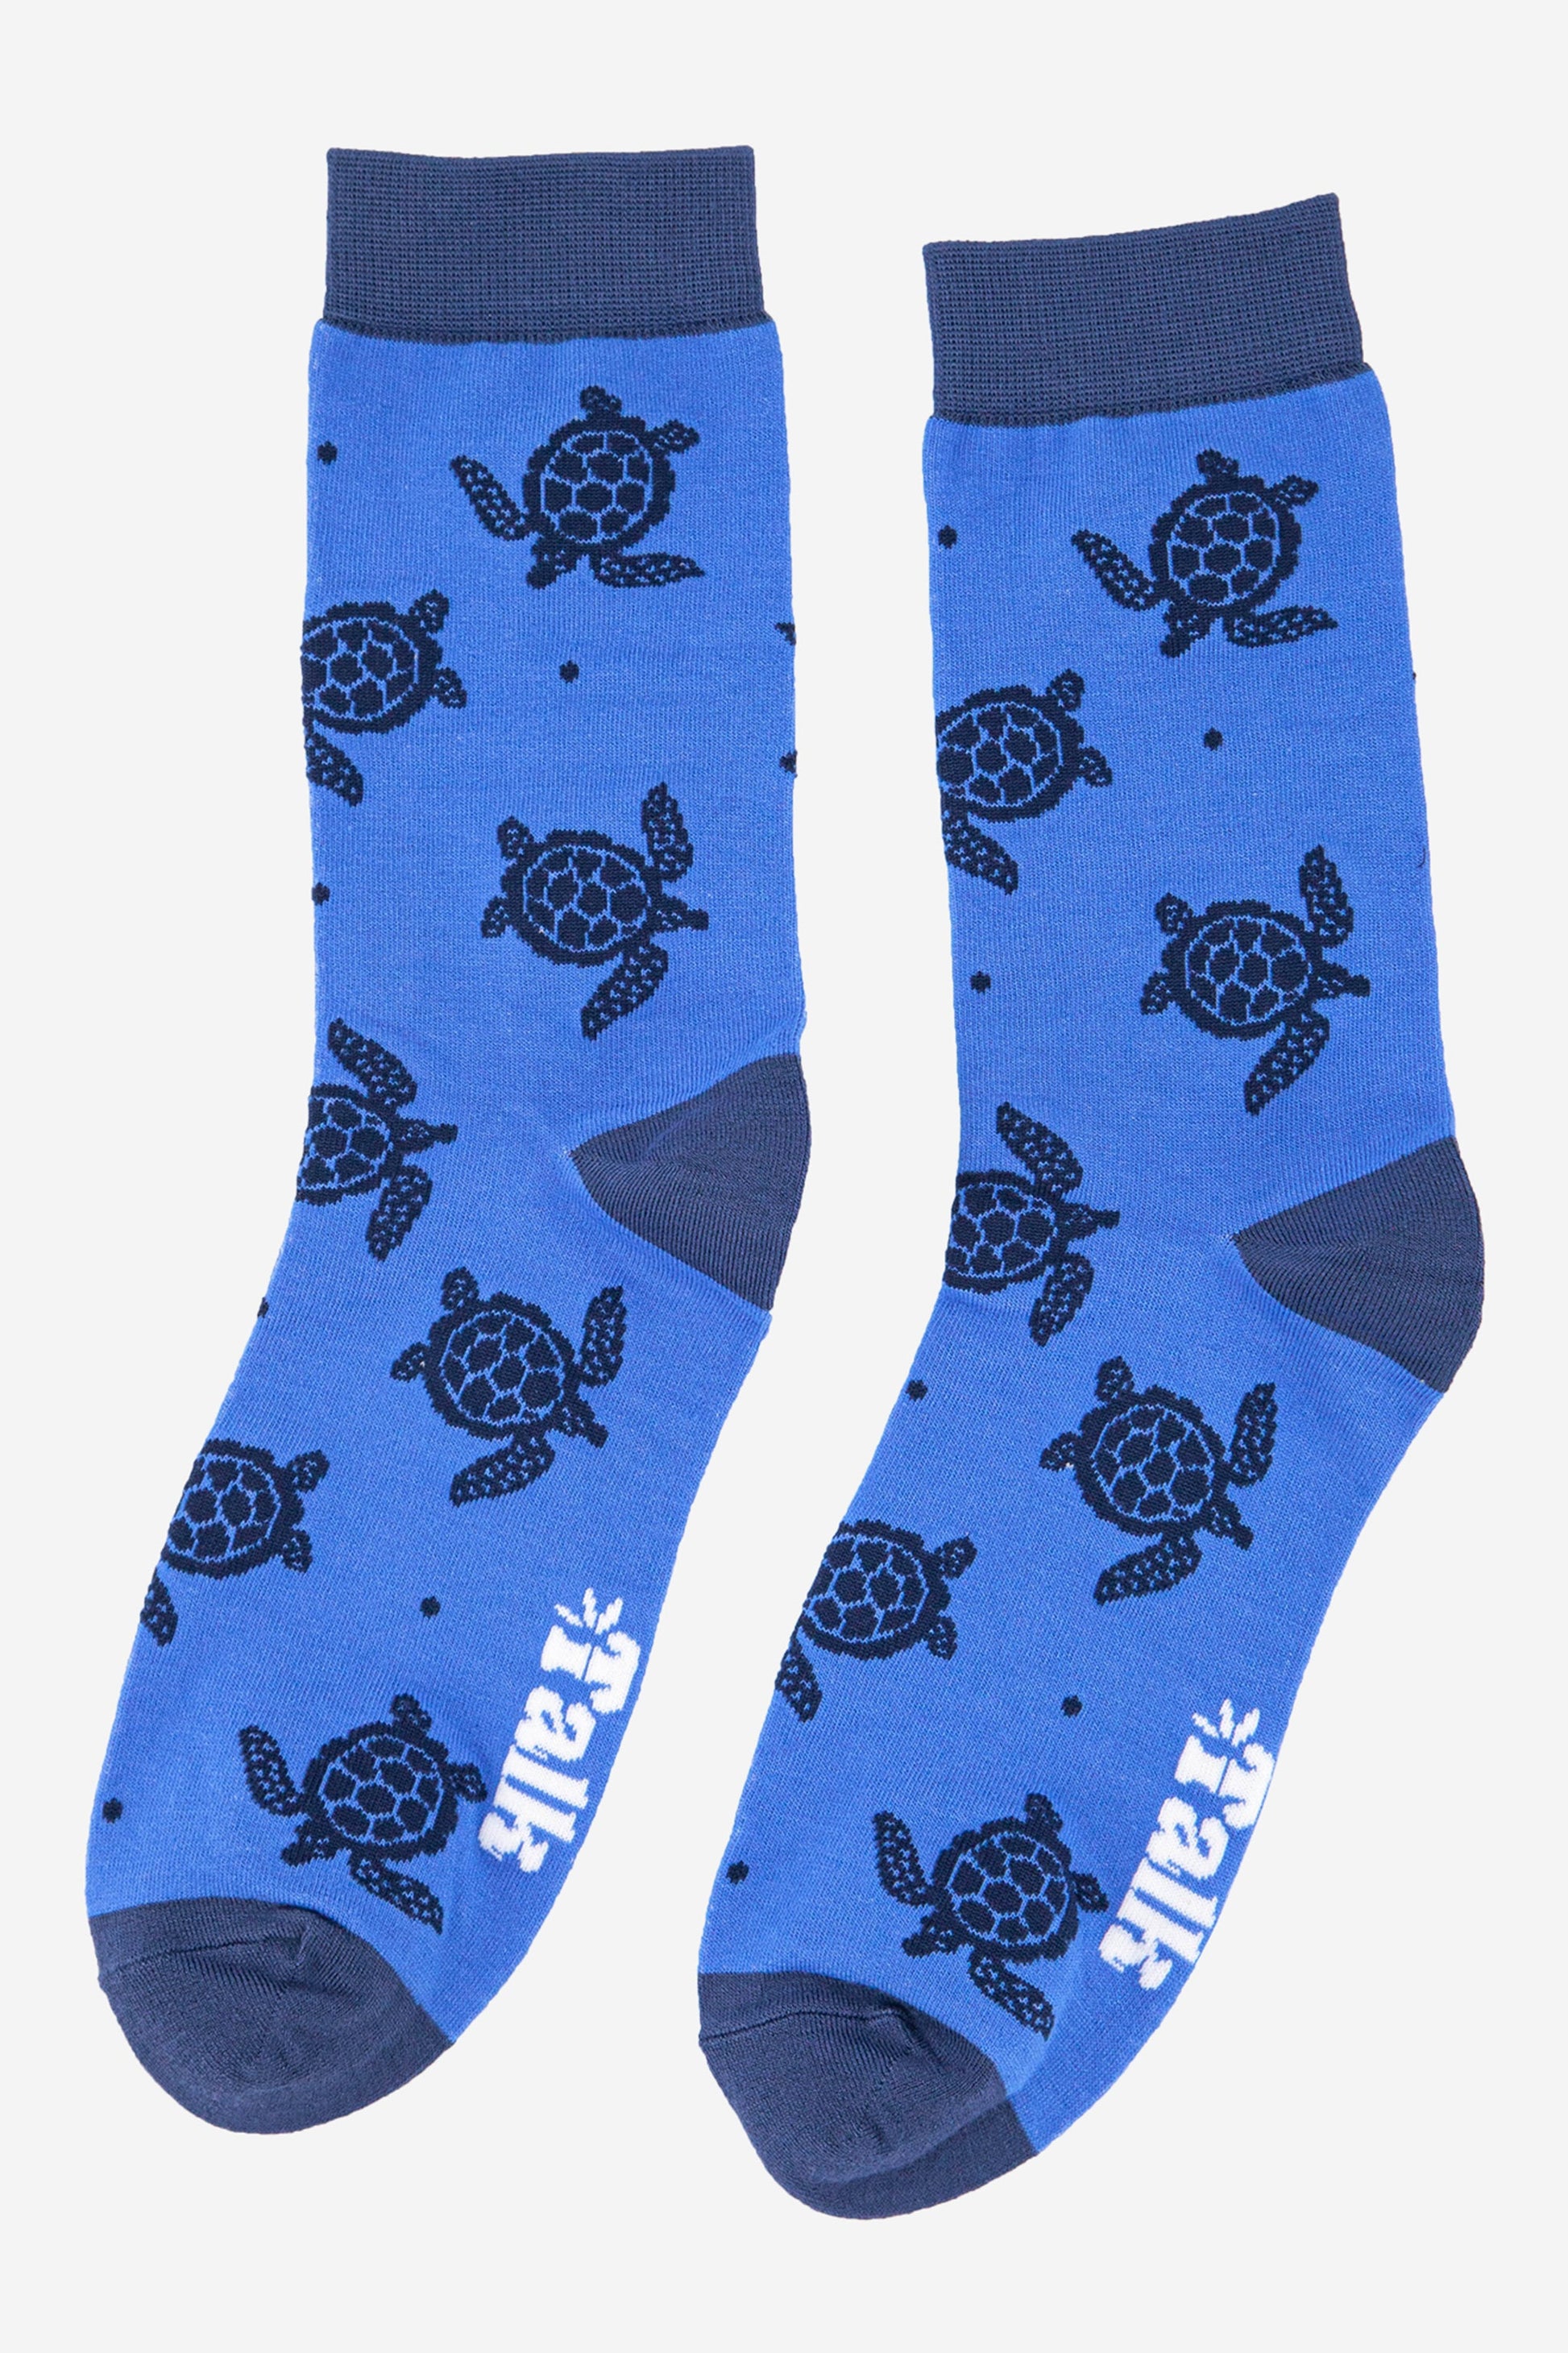 blue bamboo socks with swimming sea turtles all over, navy blue heel, toe and cuff